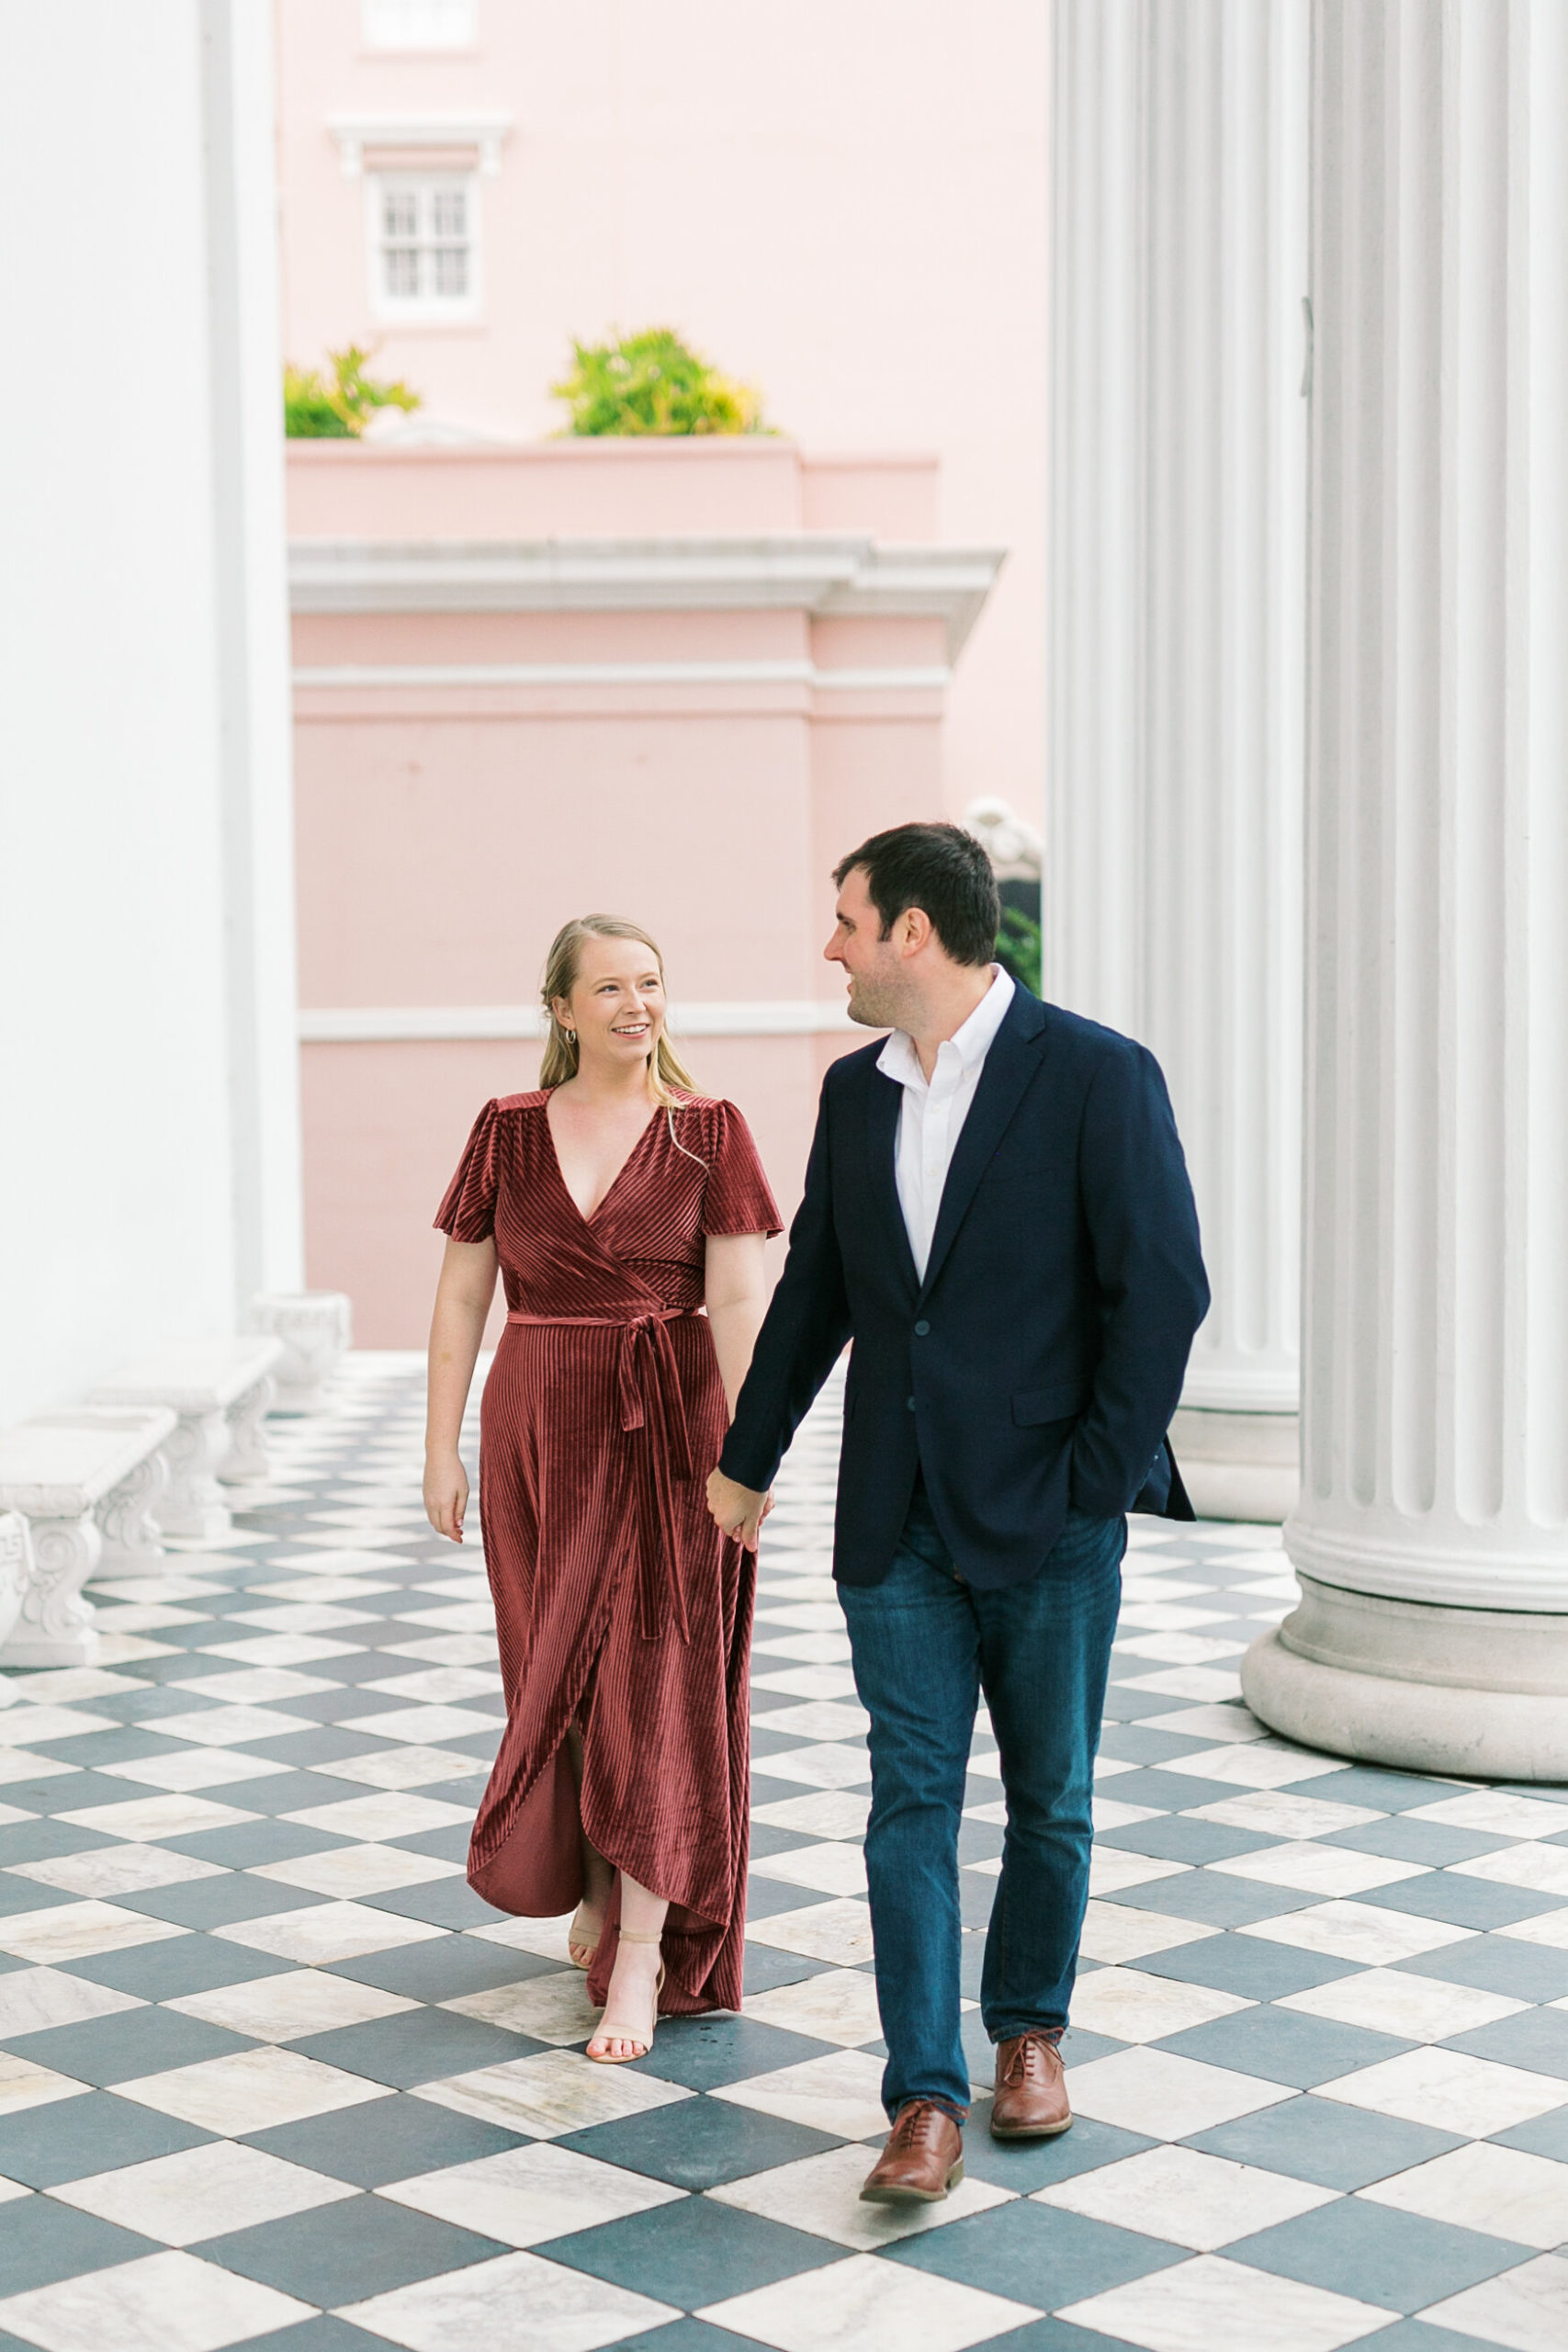 Fine art photographer in South Carolina takes couple’s engagement portraits in Charleston.